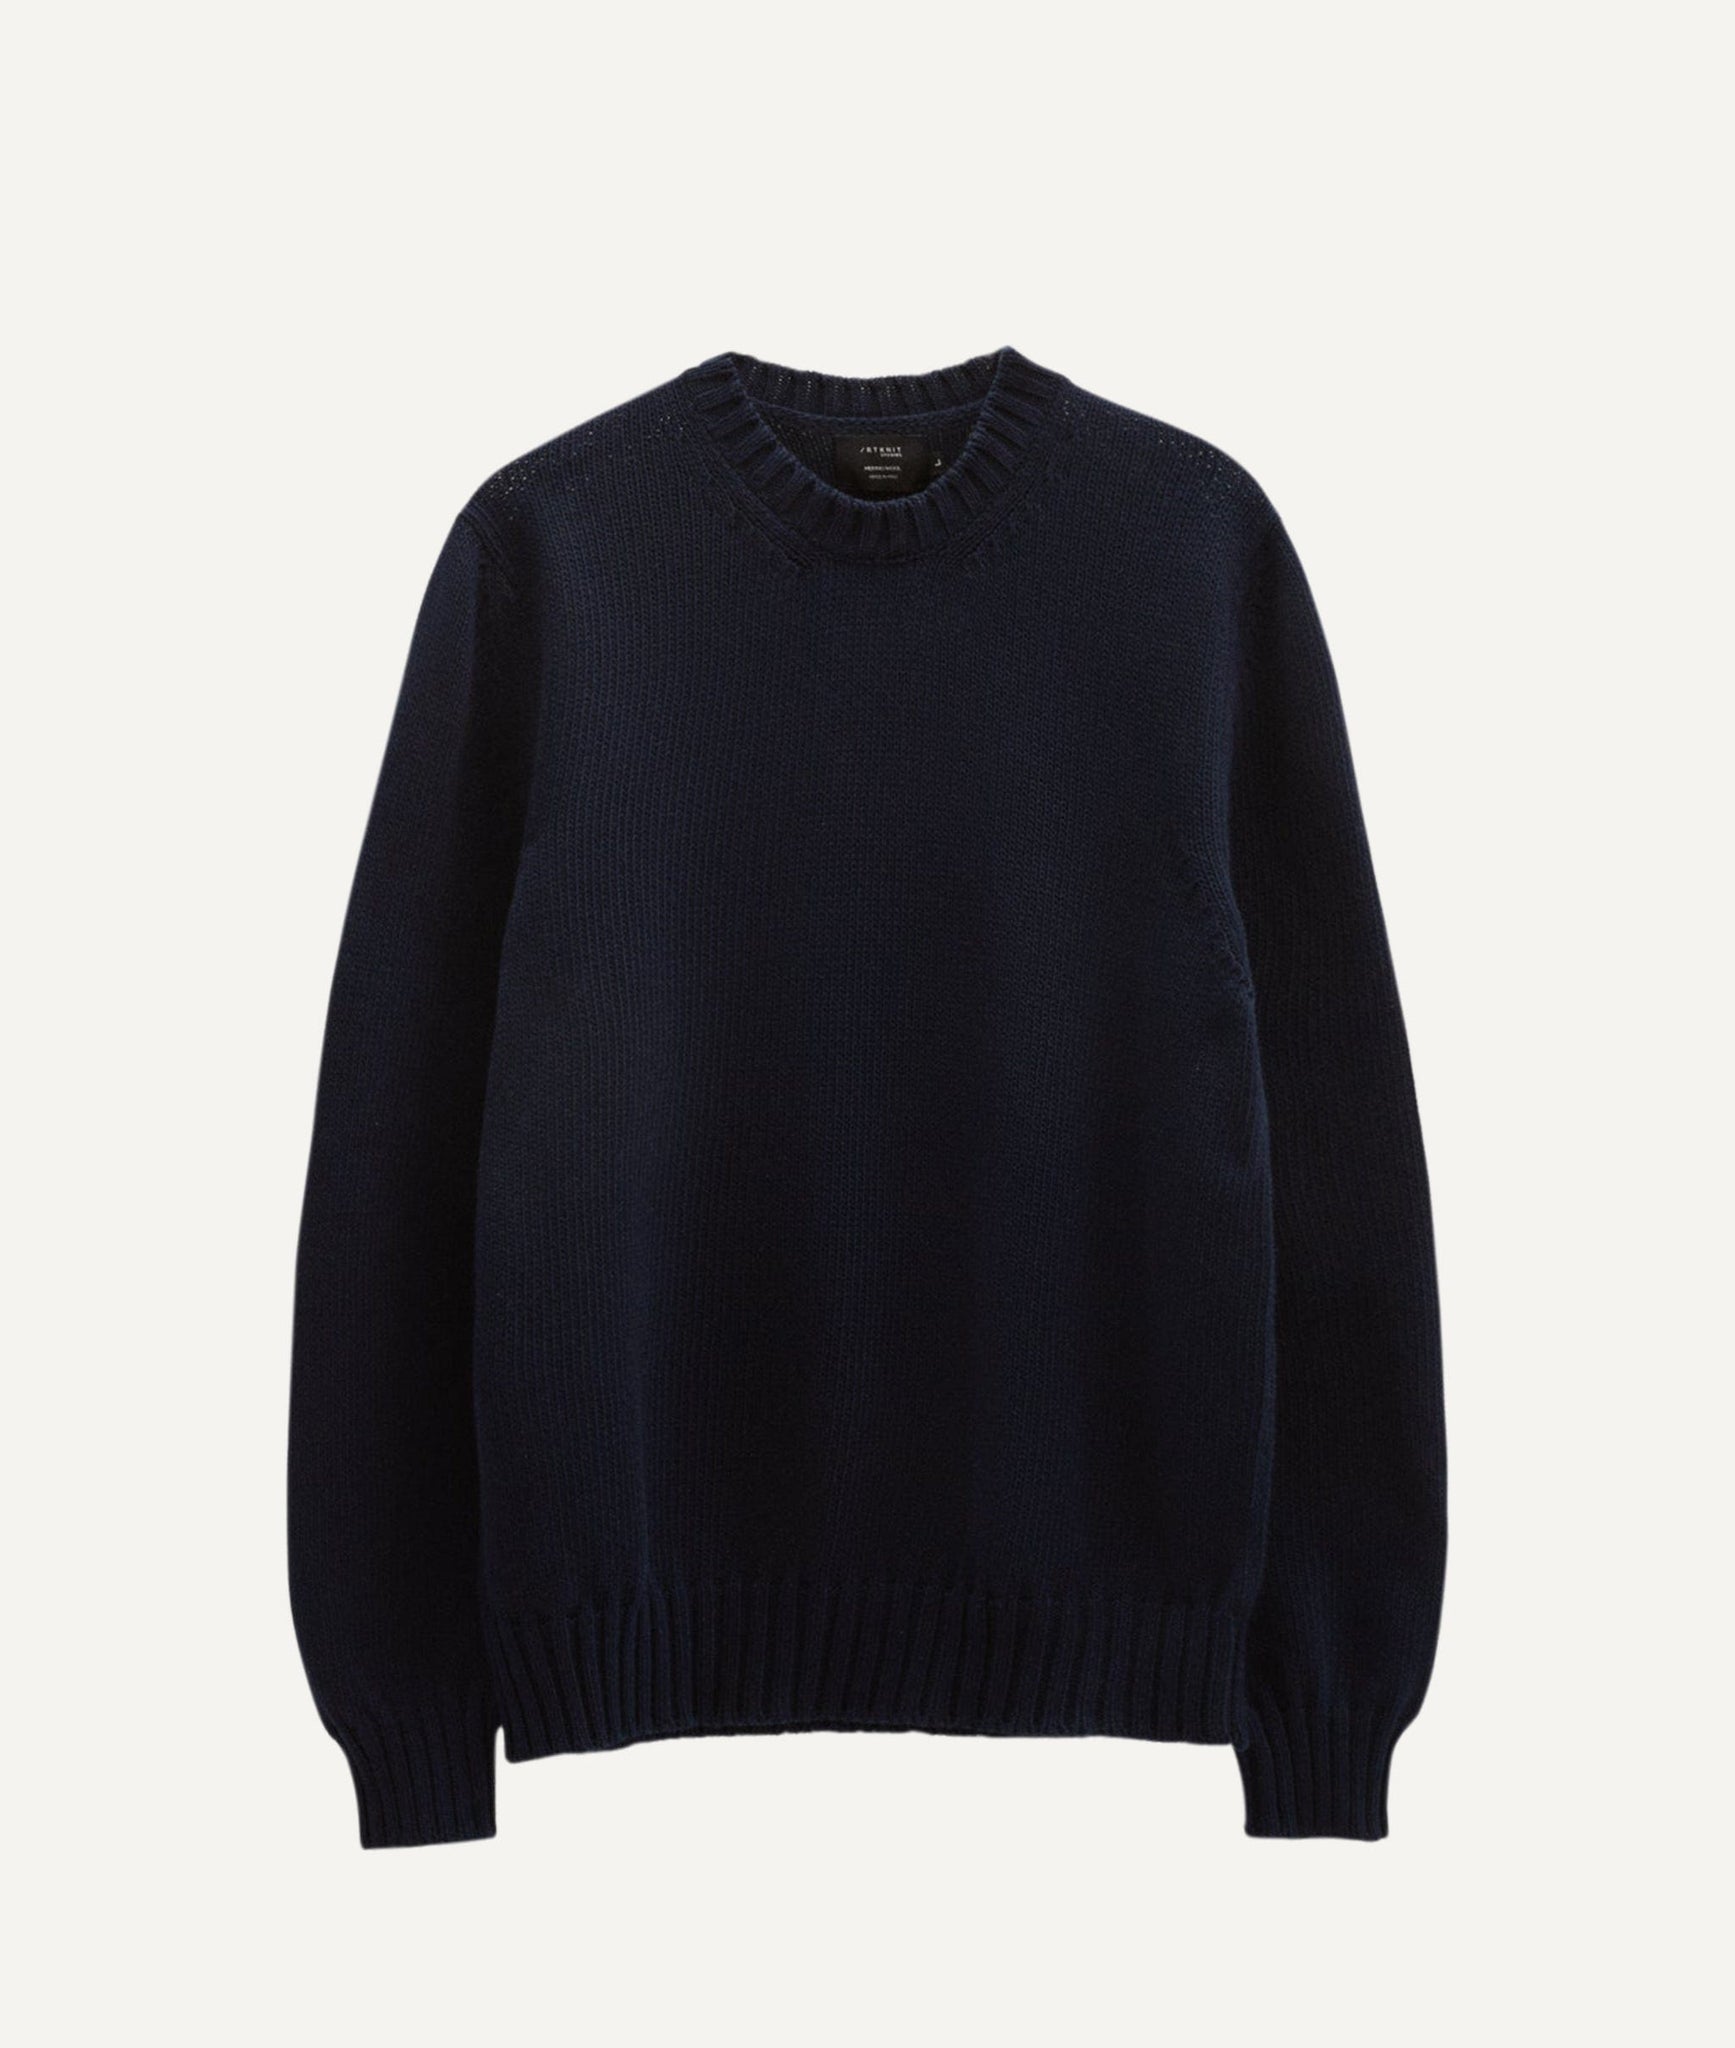 The Organic Cotton Tricot Sweater